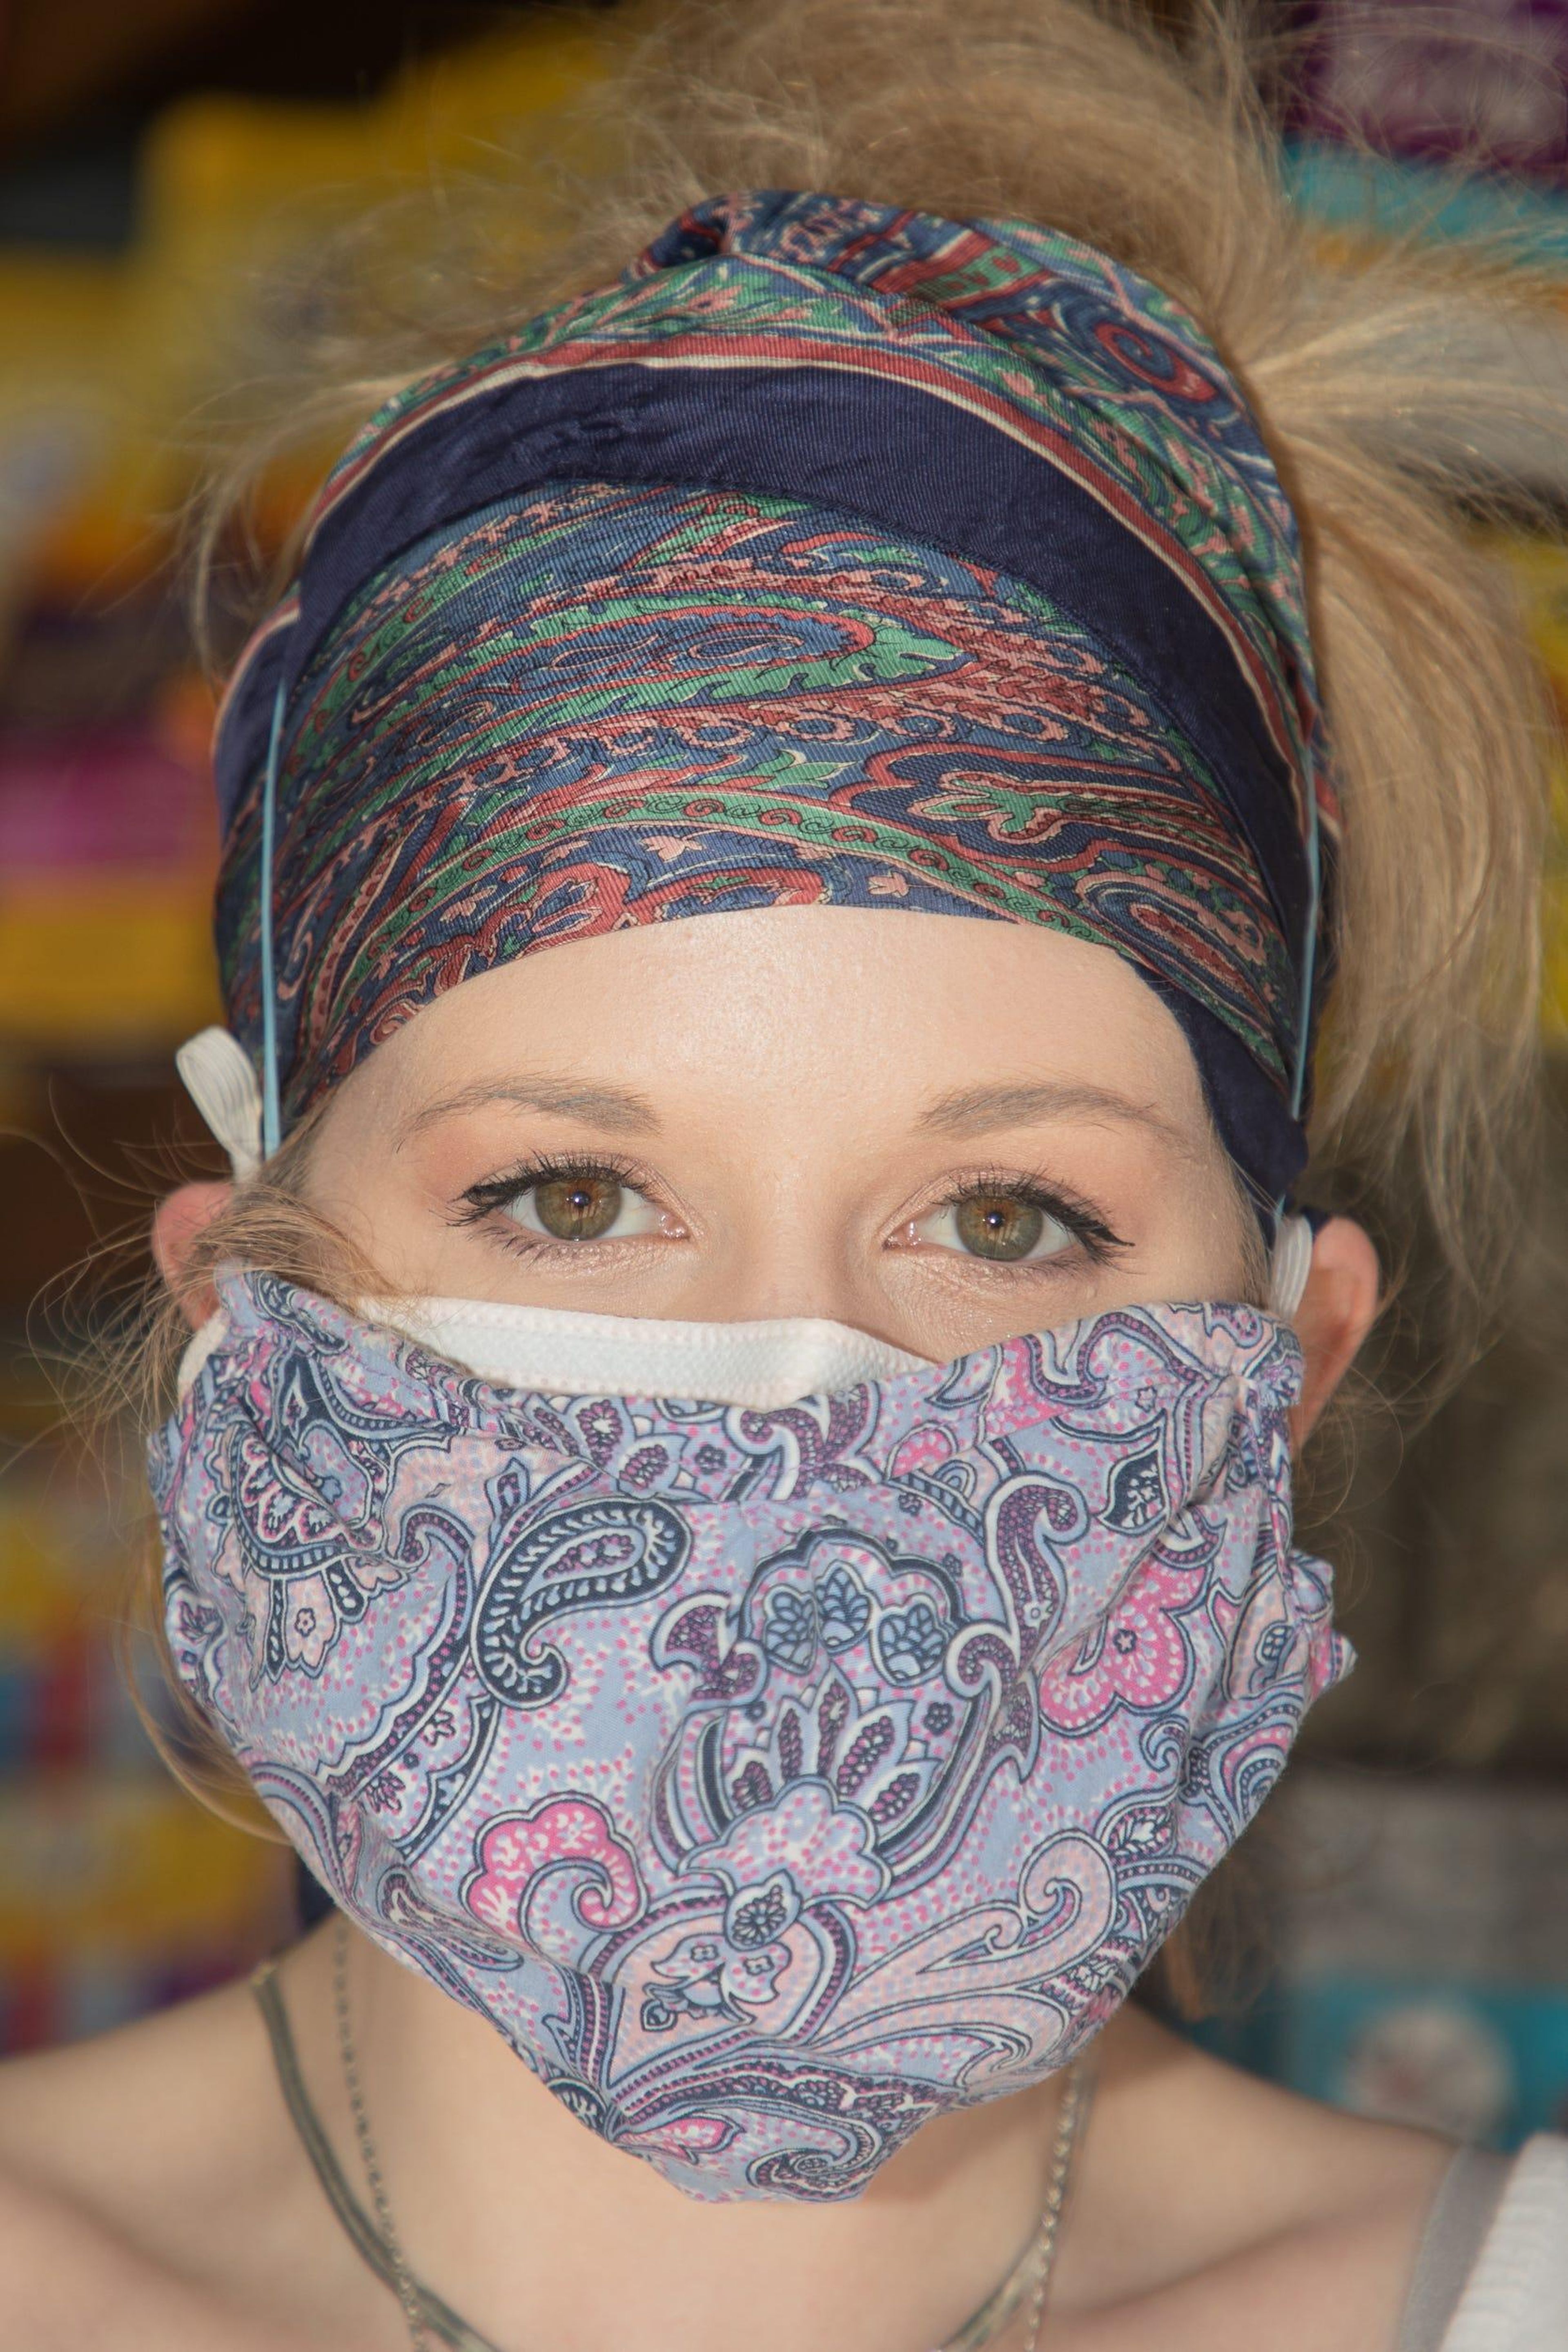 WHO: Fabric masks need 3 layers to best curb coronavirus spread